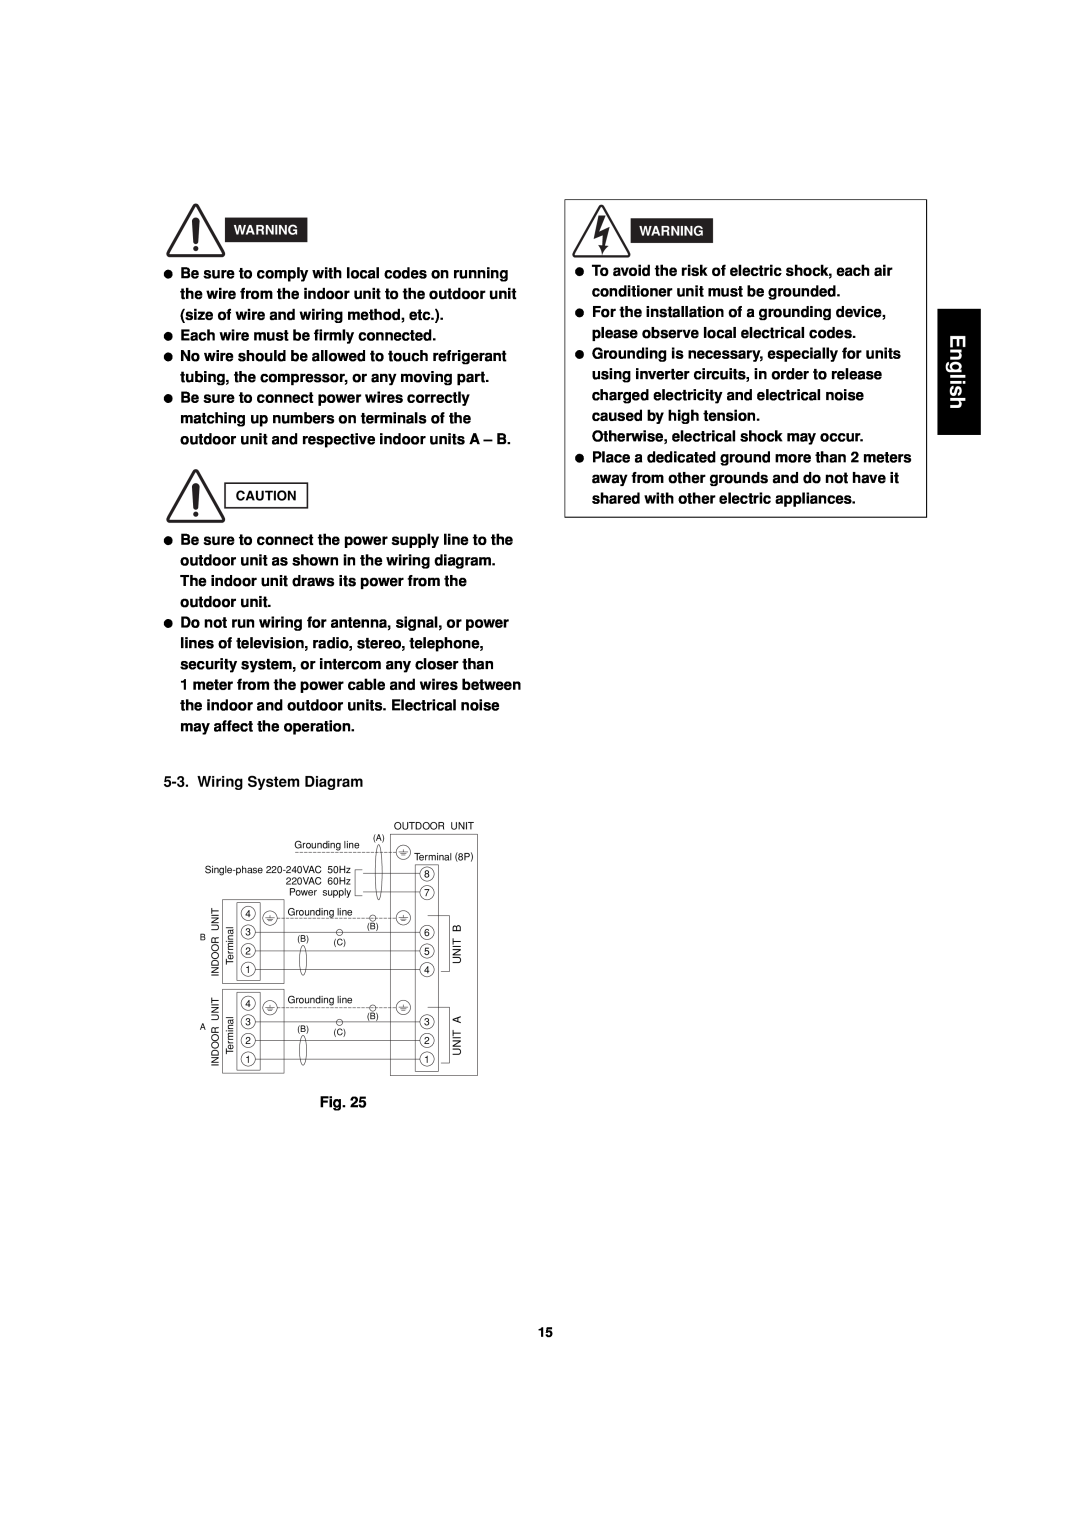 Sanyo SAP-CMRV1426EH-F, SAP-CMRV1926EH English, Each wire must be firmly connected, Wiring System Diagram, Fig 